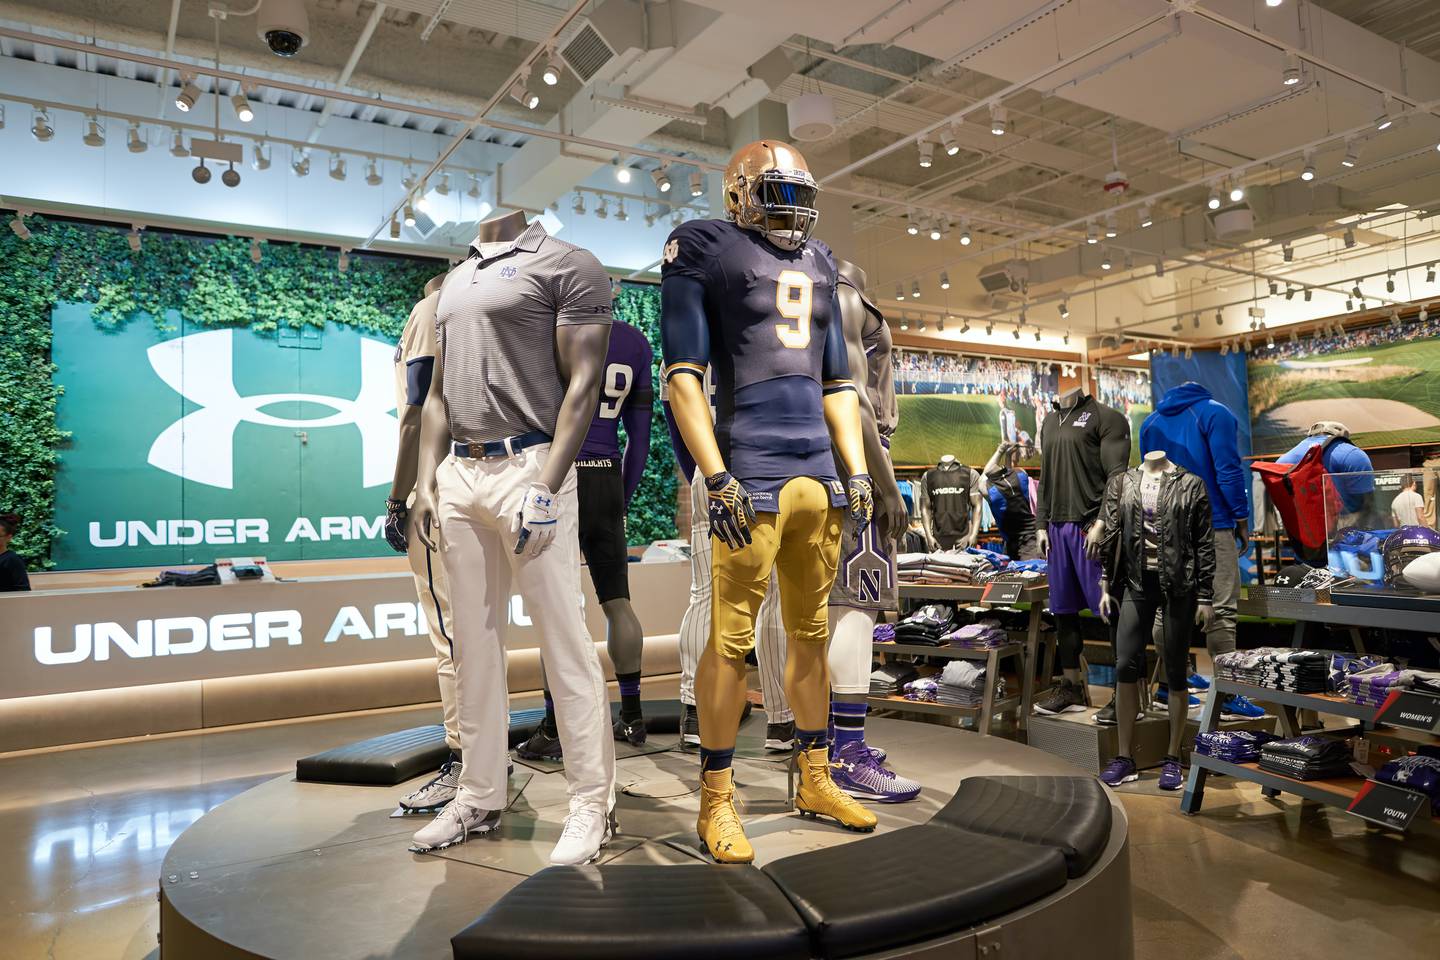 Under Armour store.